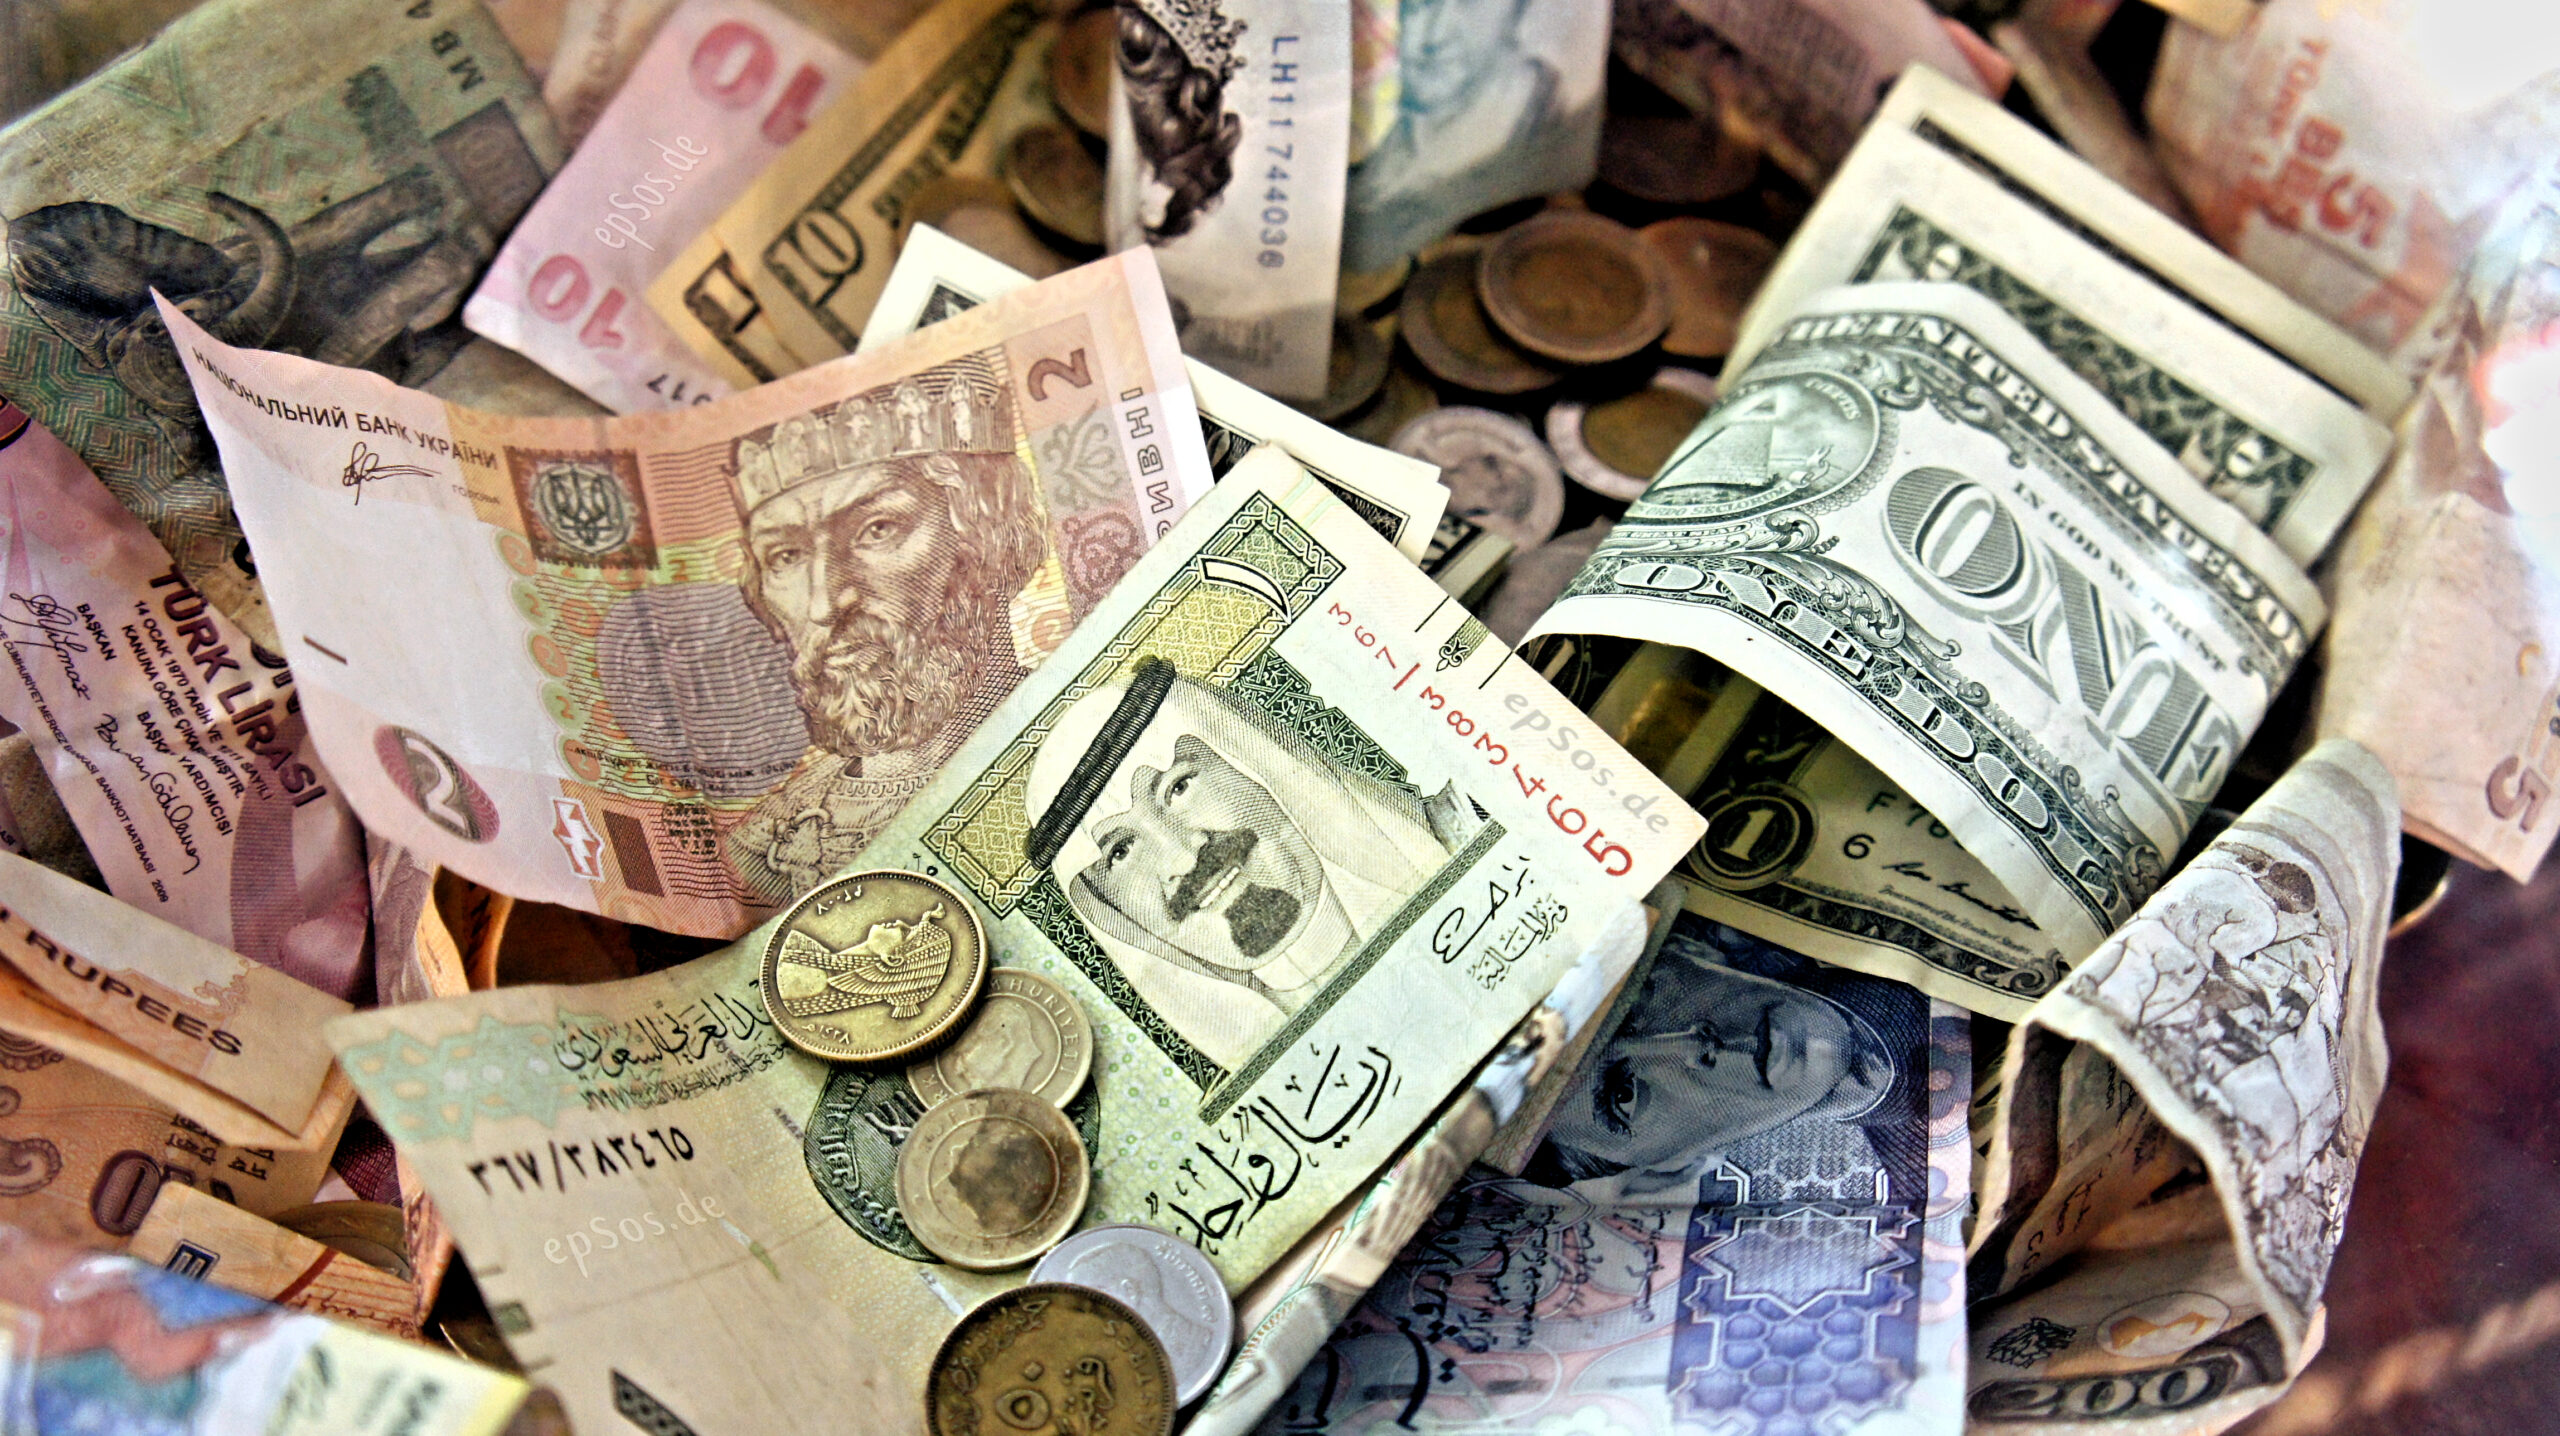 File:Exchange Money Conversion to Foreign Currency.jpg